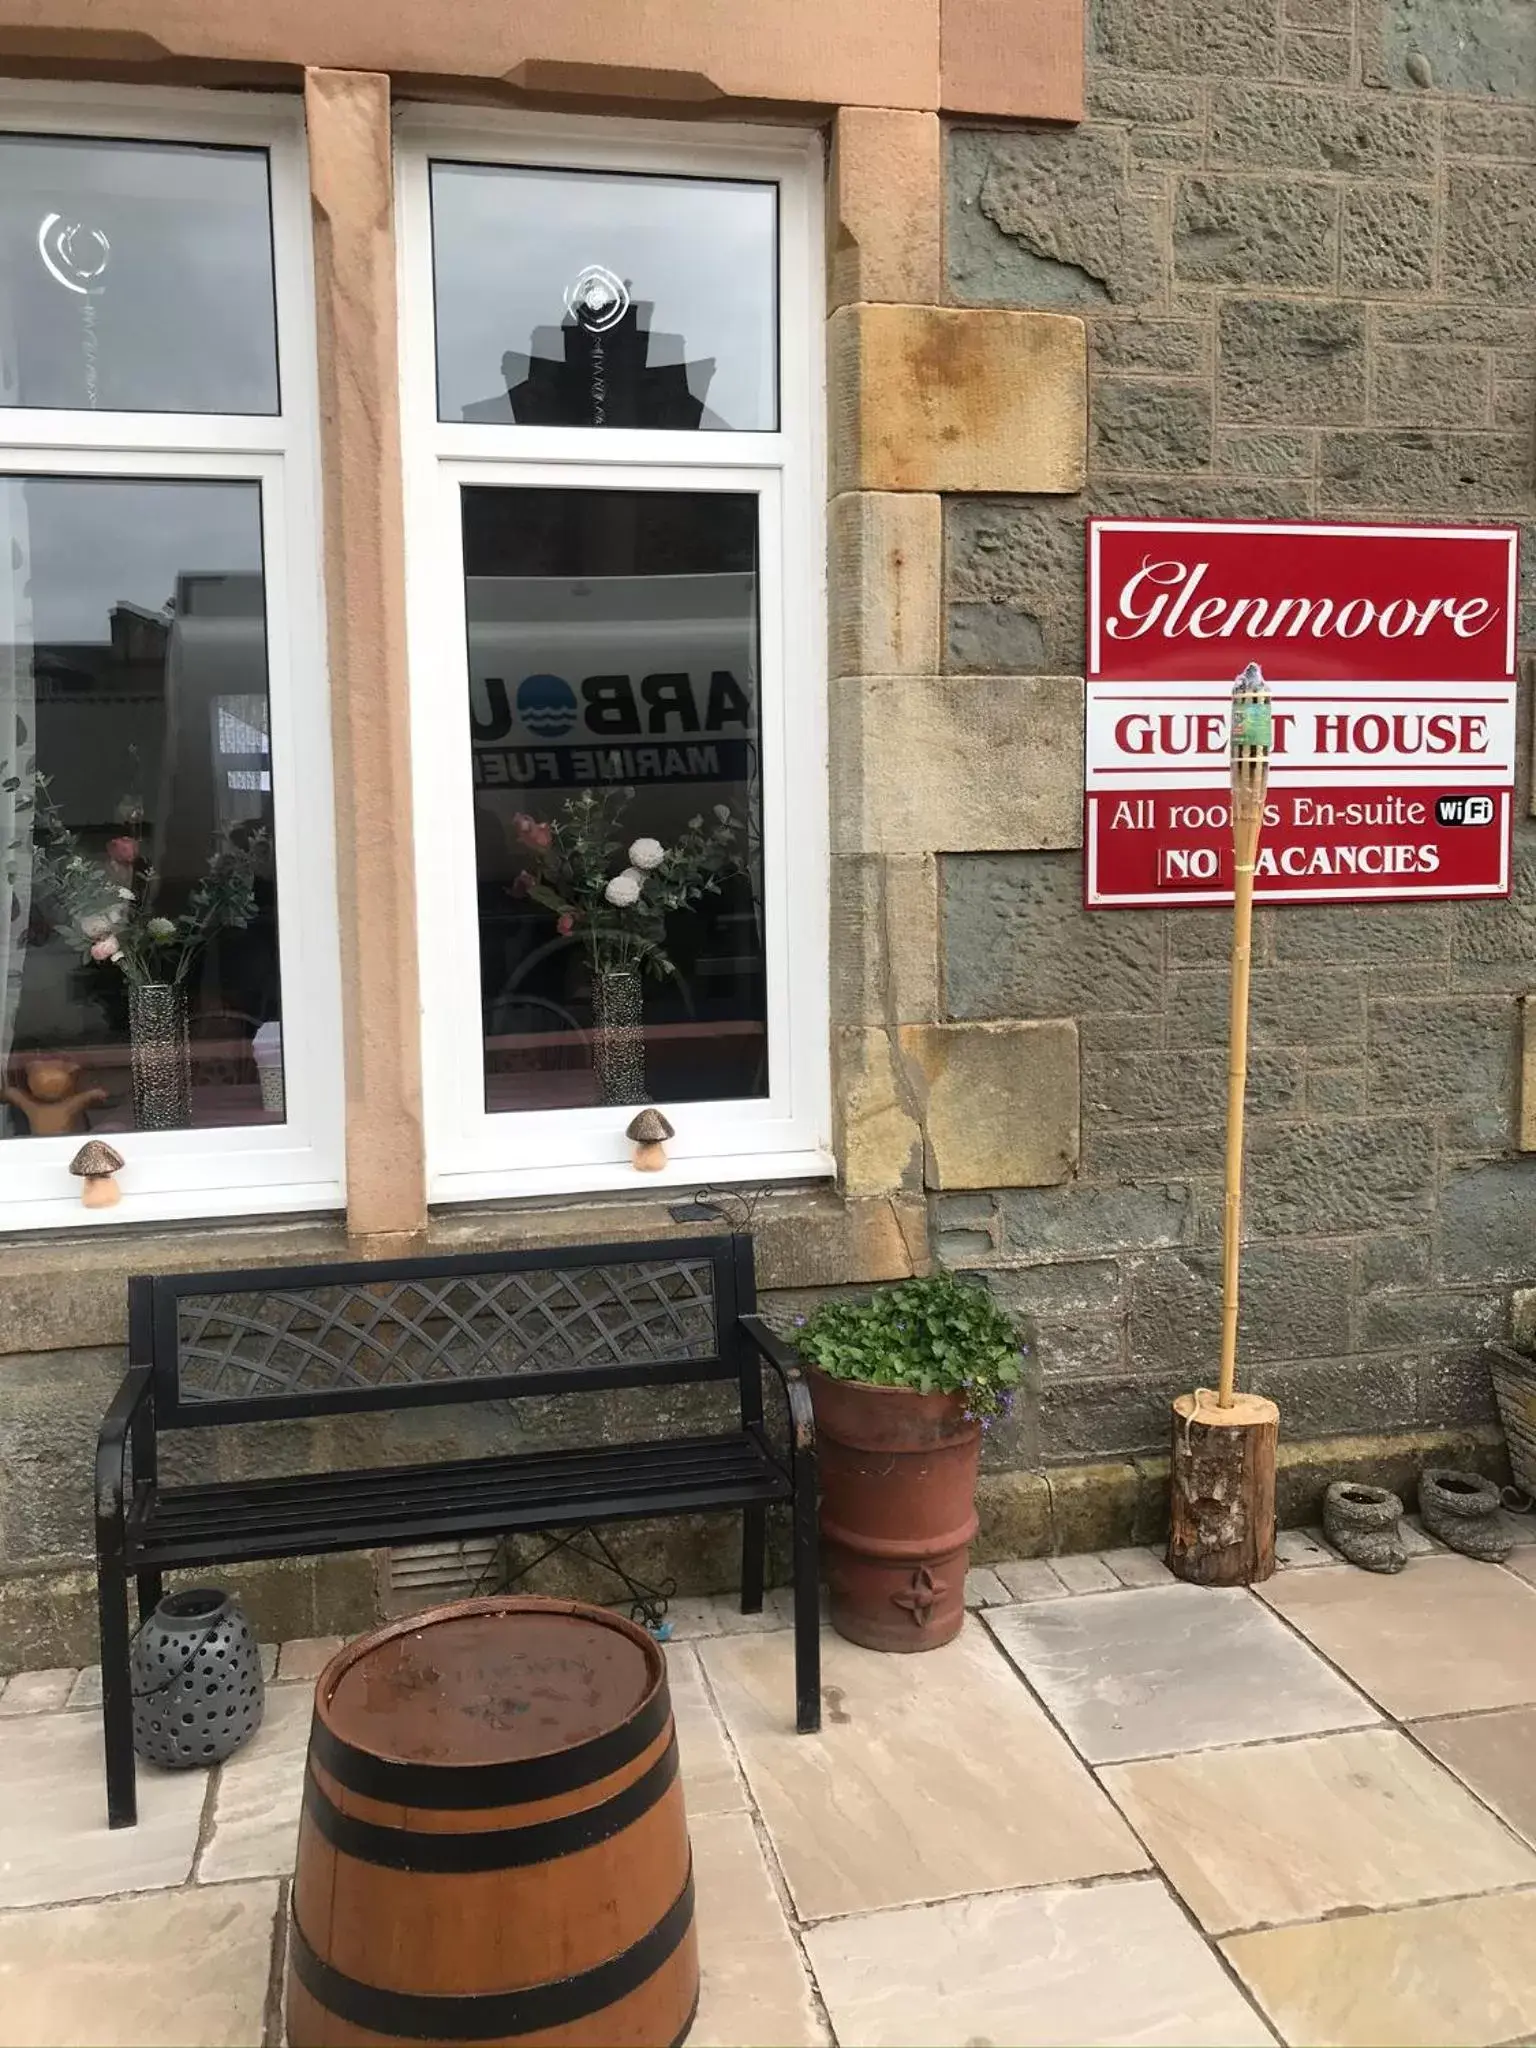 Property building in Glenmoore Guest House